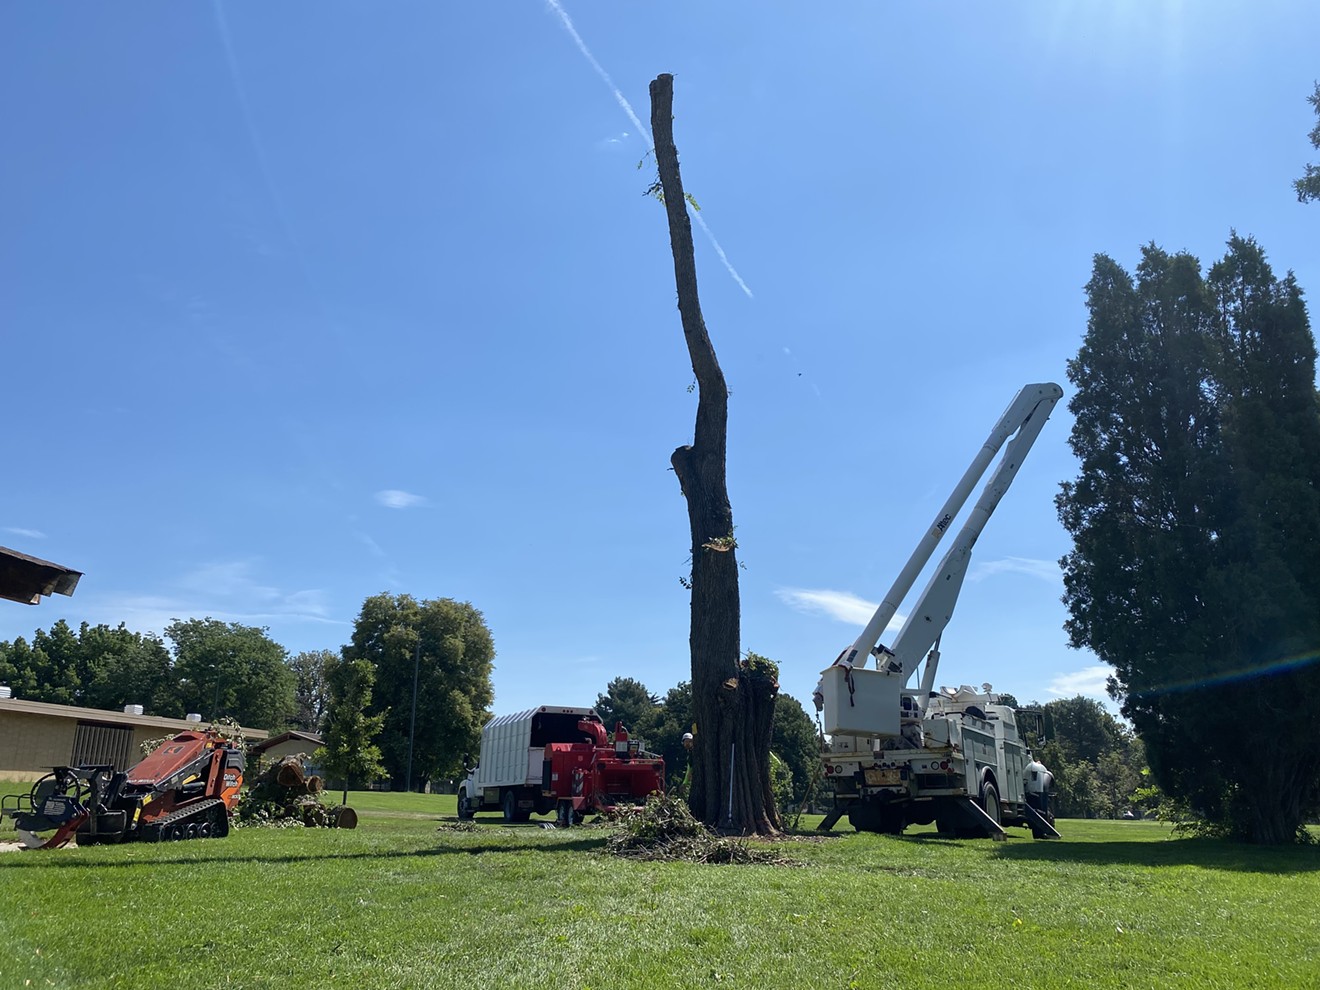 One of the tree removals taking place in Congress Park.